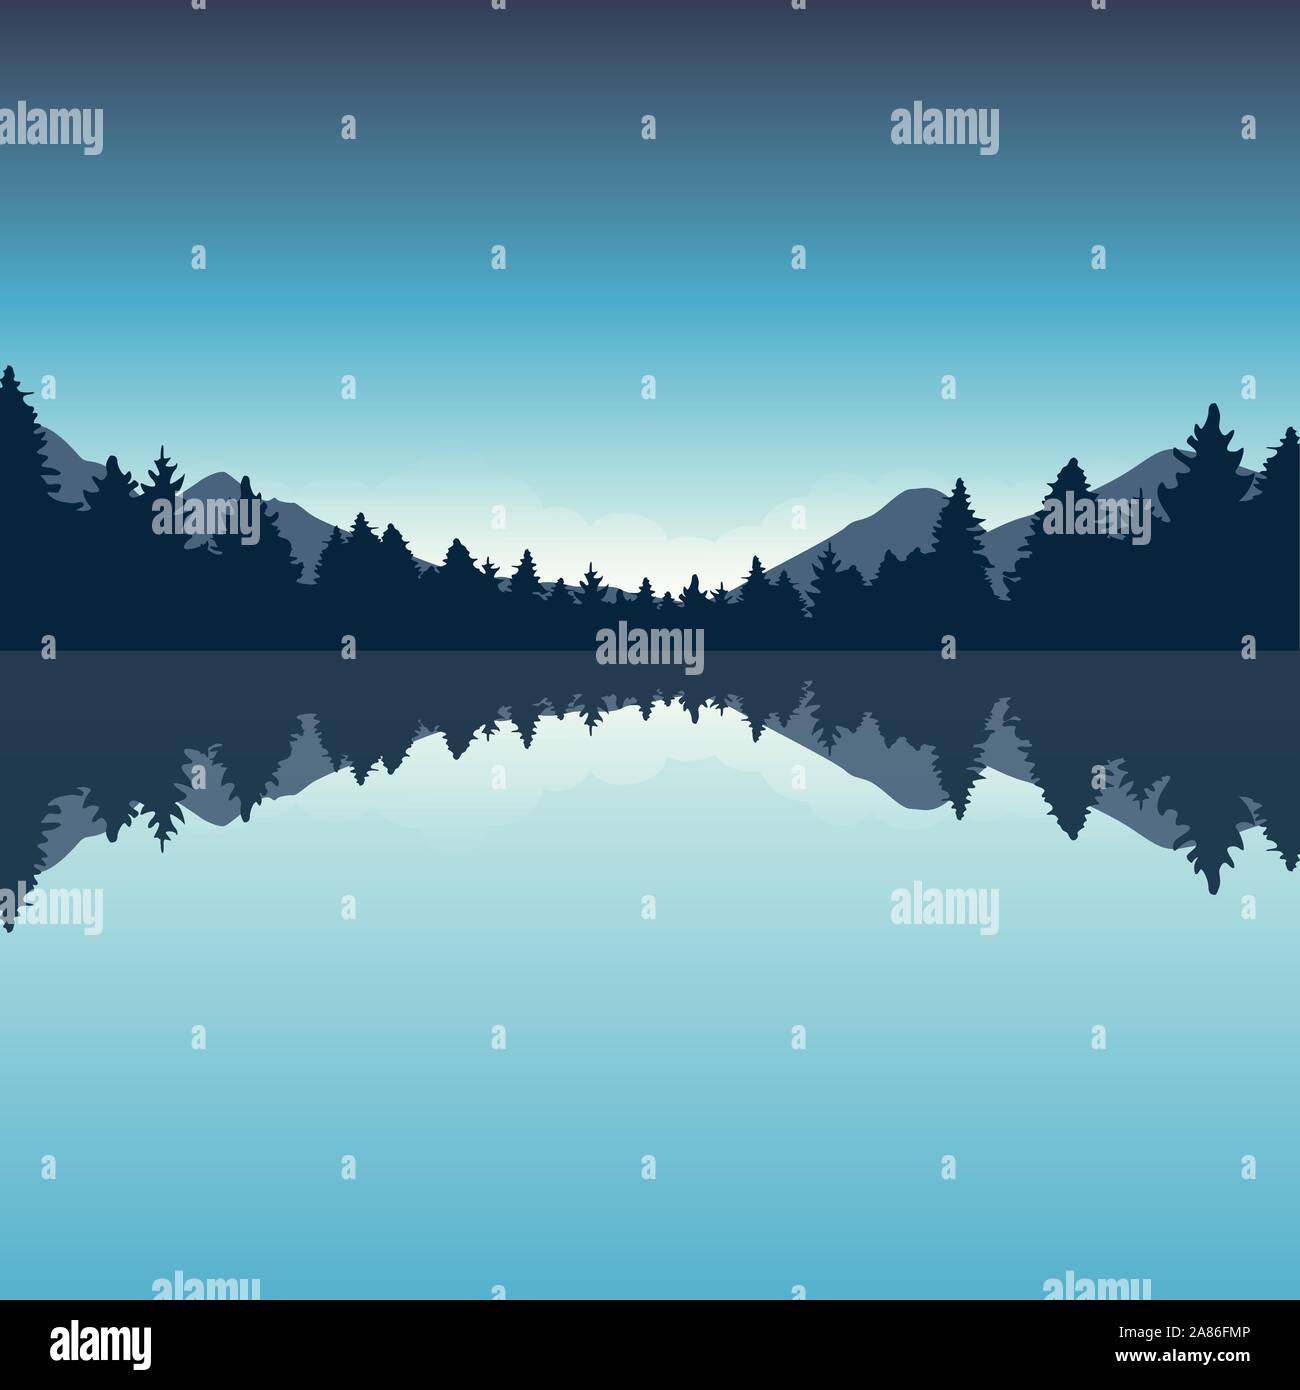 beautiful lake and blue pine forest nature landscape vector illustration EPS10 Stock Vector